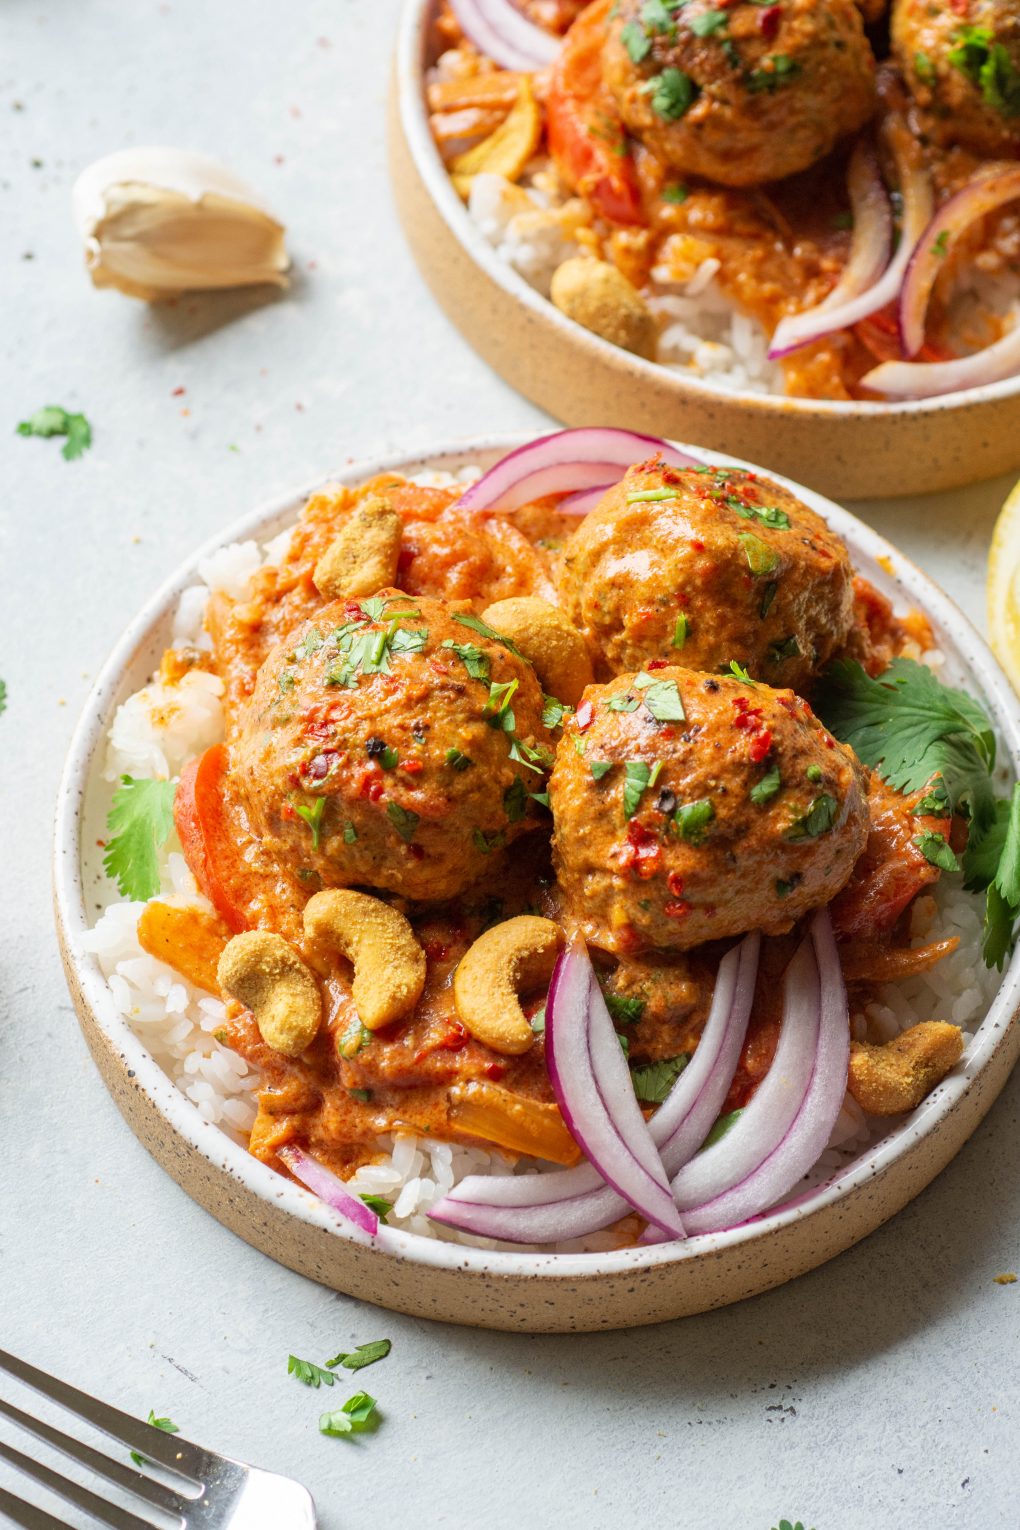 Side angle shot of a small white speckled plate on a light colored background filled with white rice topped with 3 meatballs in a vibrant red curry sauce. Topped with chopped cilantro, thin slices of red onion, and curried cashews. 